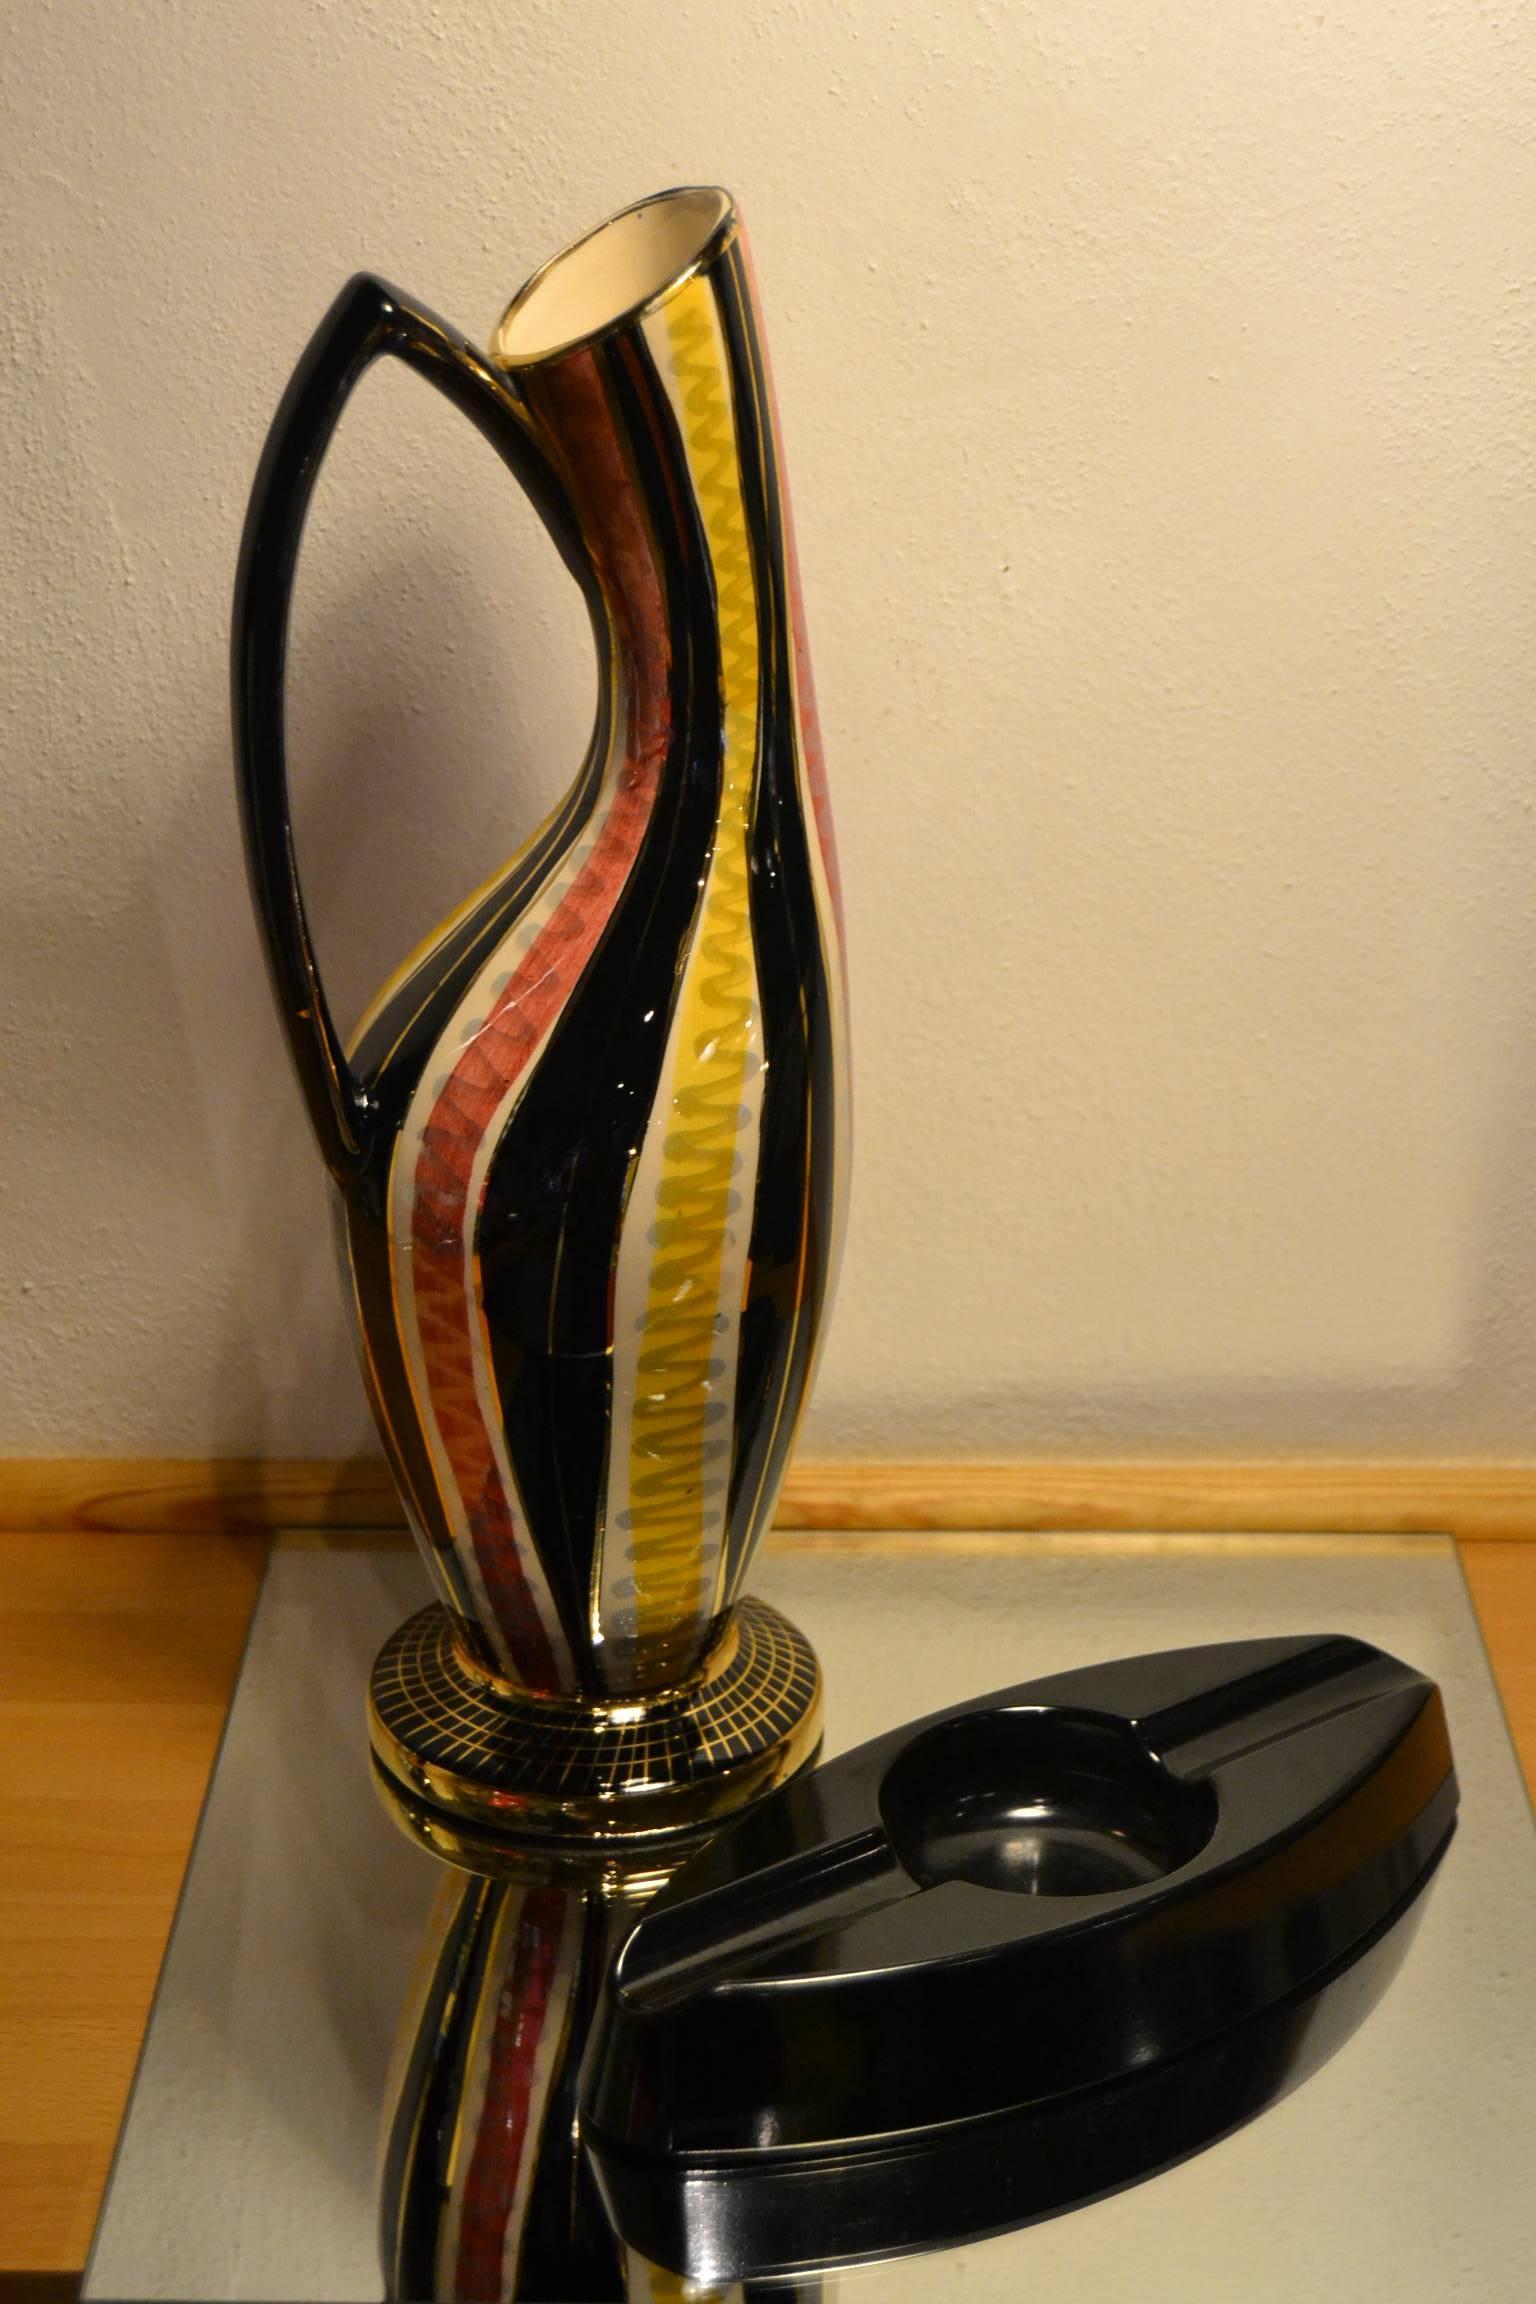 Mid-Century hand-painted ceramic vase by H. Bequet .
Beautiful use of colors black, gold, yellow, dark pink and gold rims. Typical design for the late 1950s - begin 1960s - expo 58 style. 

H.Bequet started his own company at Quaregnon (Belgium)